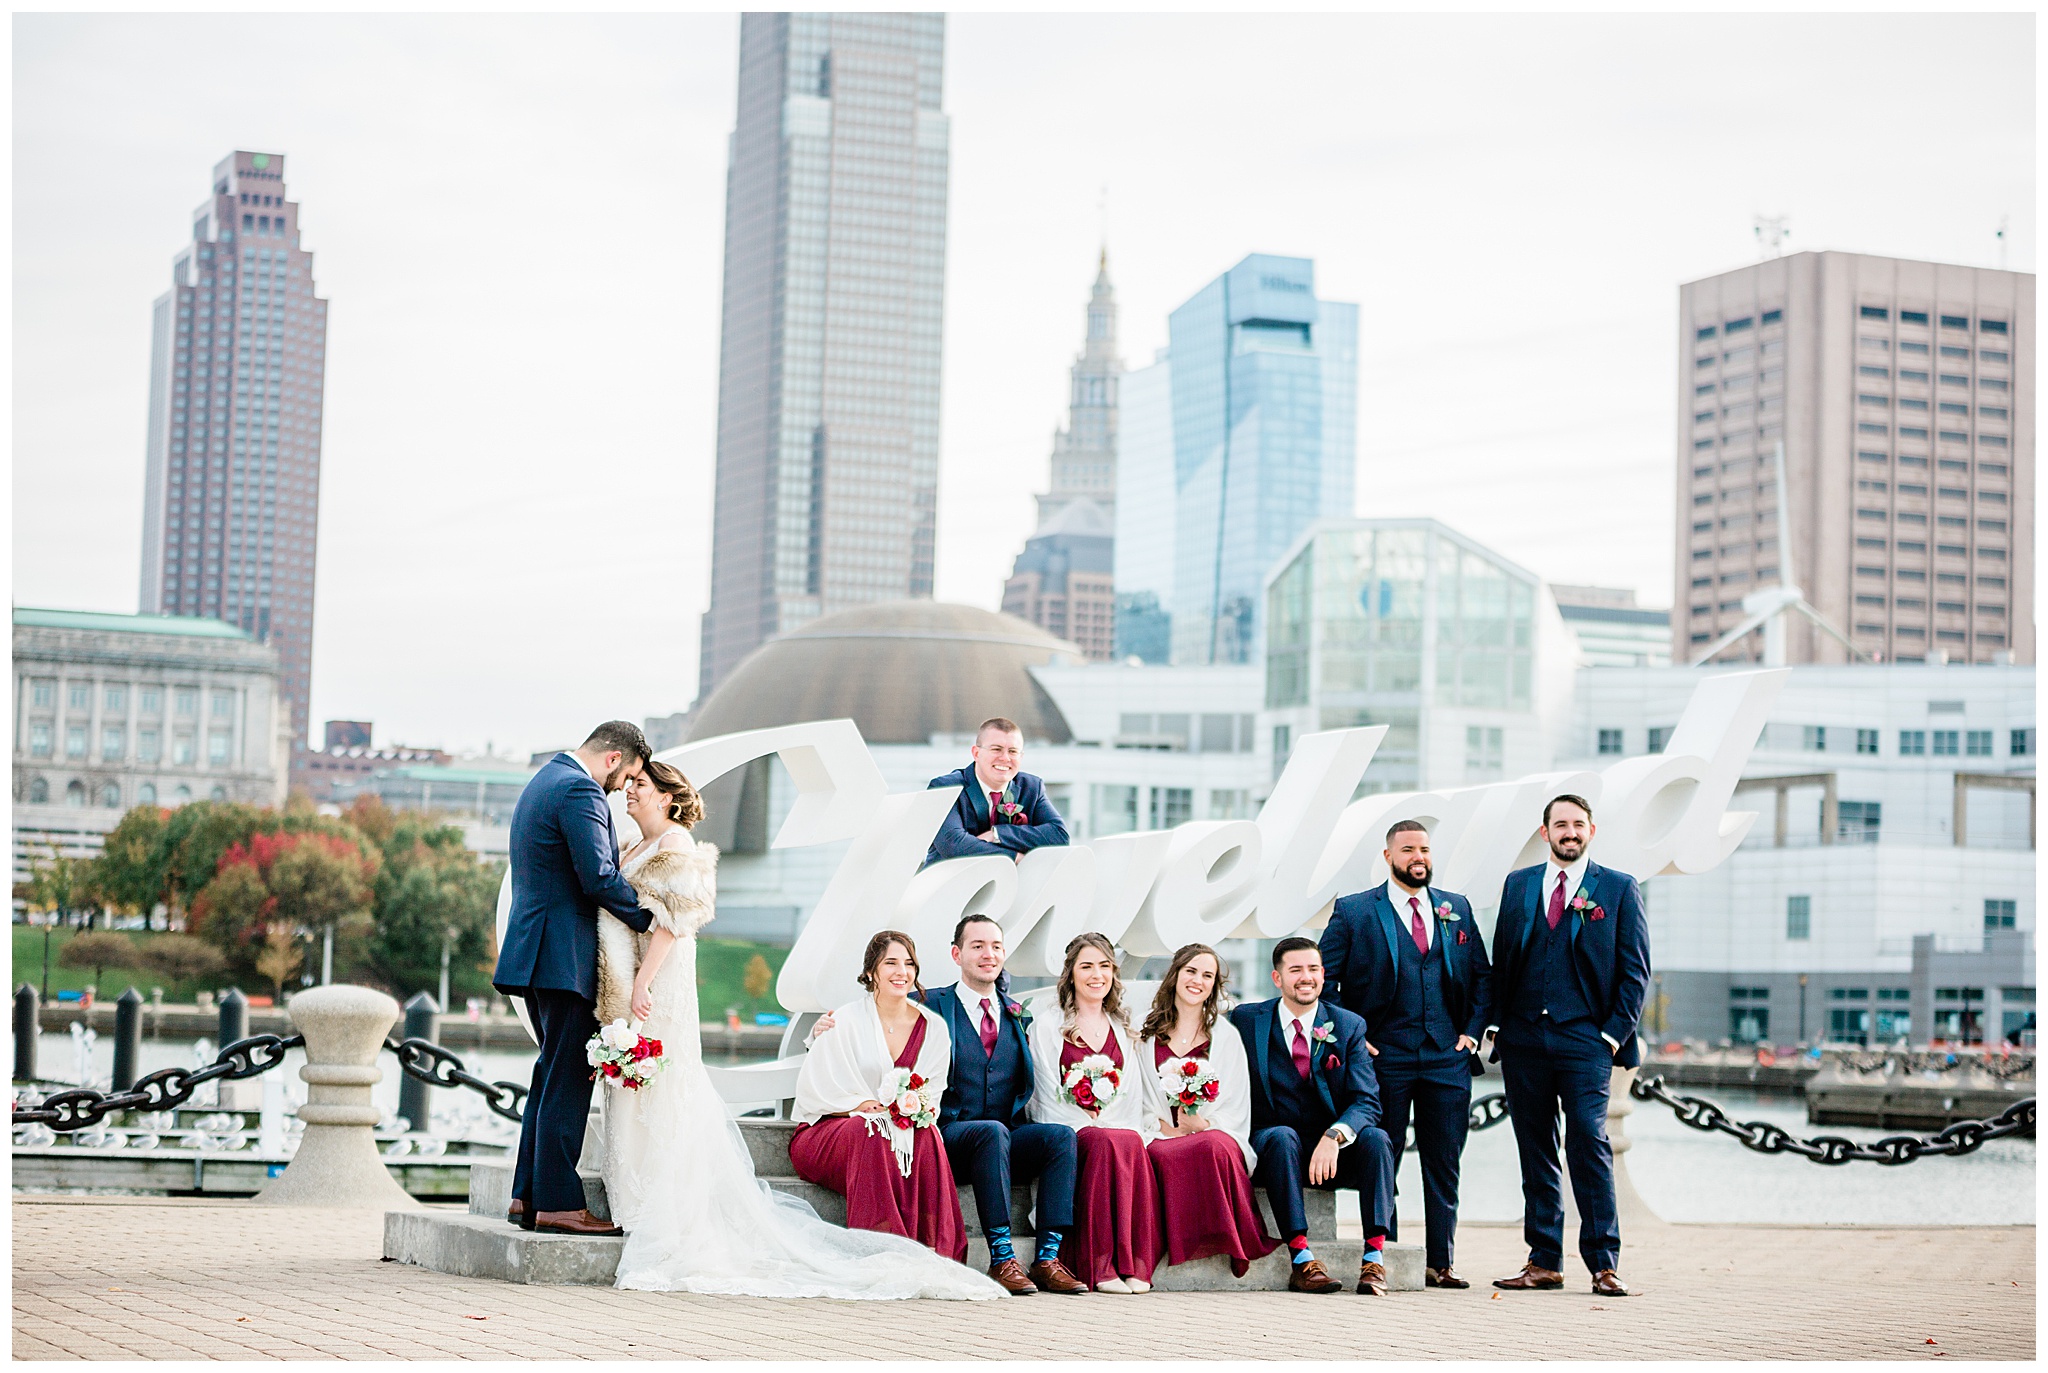 BRIDAL PARTY AT CLEVELAND SIGN